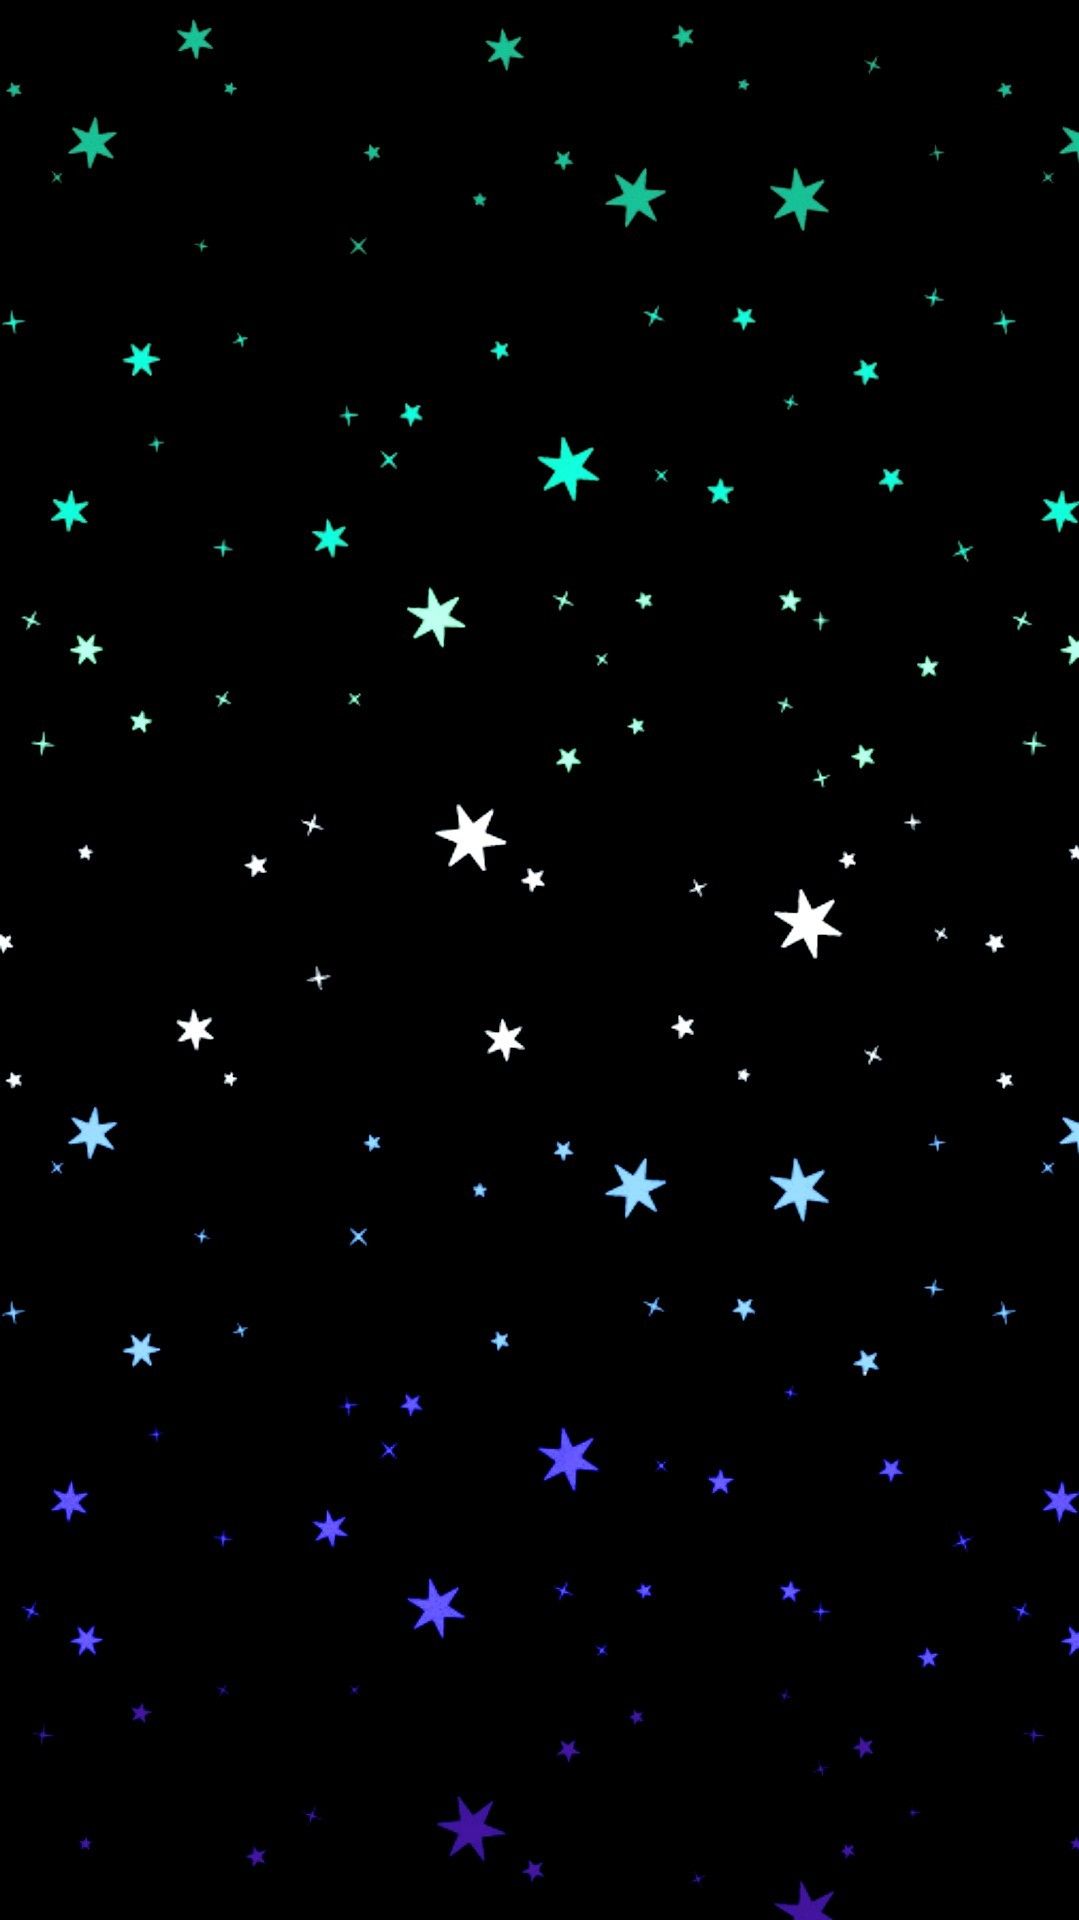 Aesthetic phone wallpaper with stars on a black background - Gay